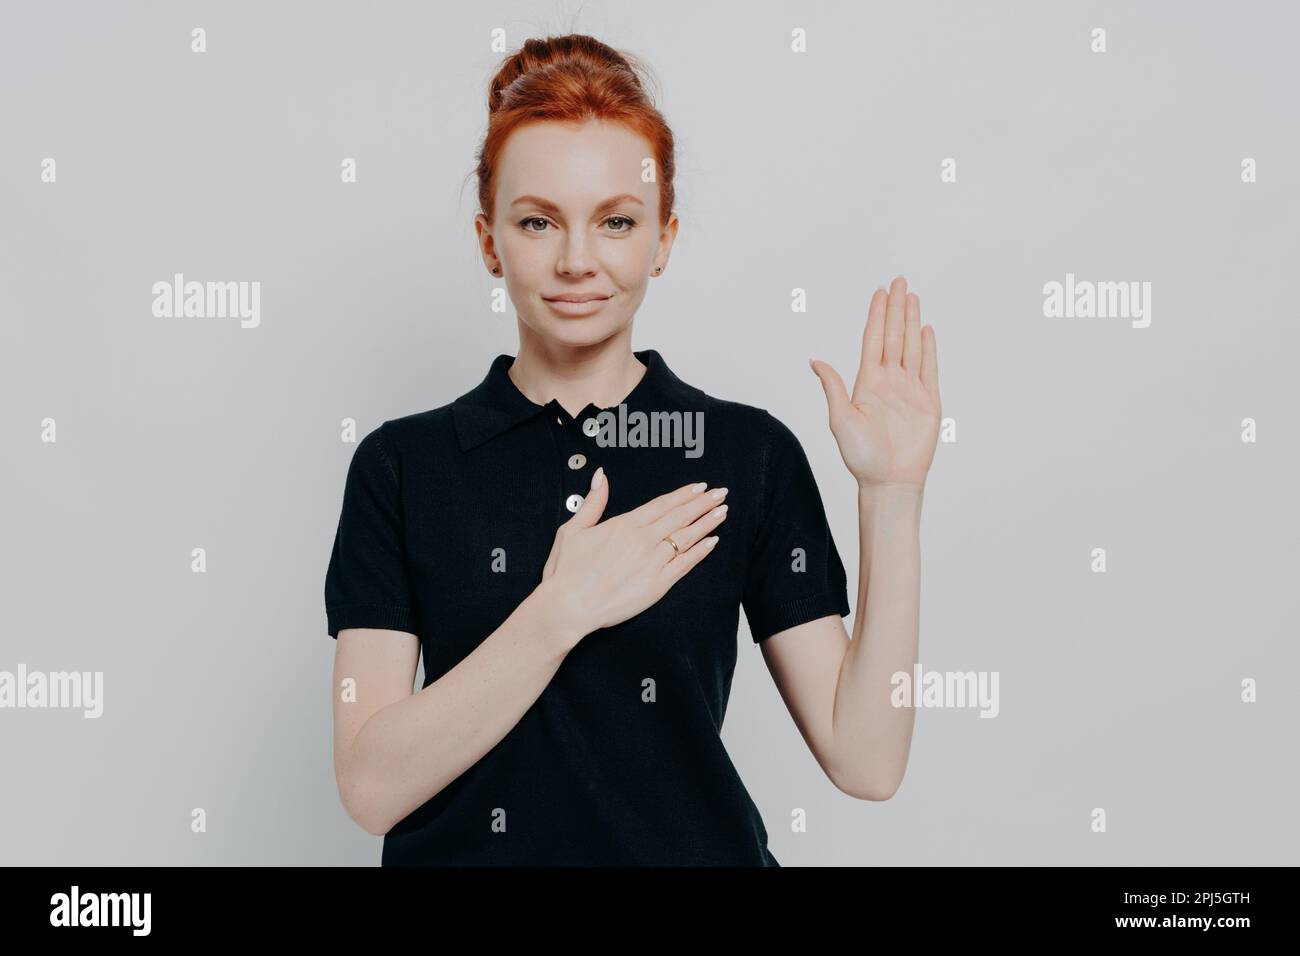 Swear to tell only truth. Studio shot of serious red haired female wearing black t-shirt making promise, swearing with hand on chest while standing ag Stock Photo